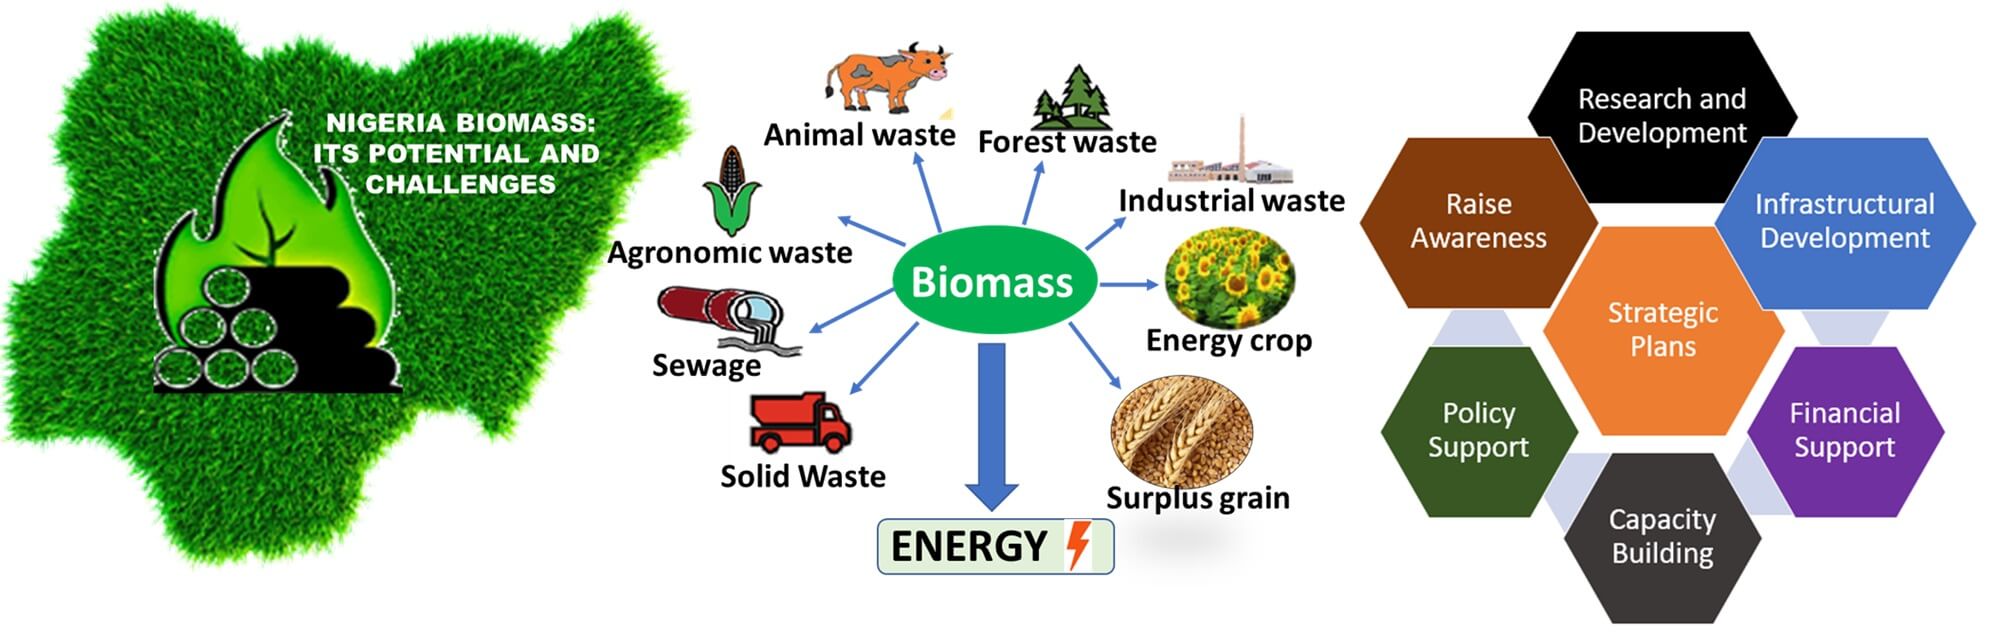 Nigerian Biomass for Bioenergy Applications: A Review on the Potential and Challenges